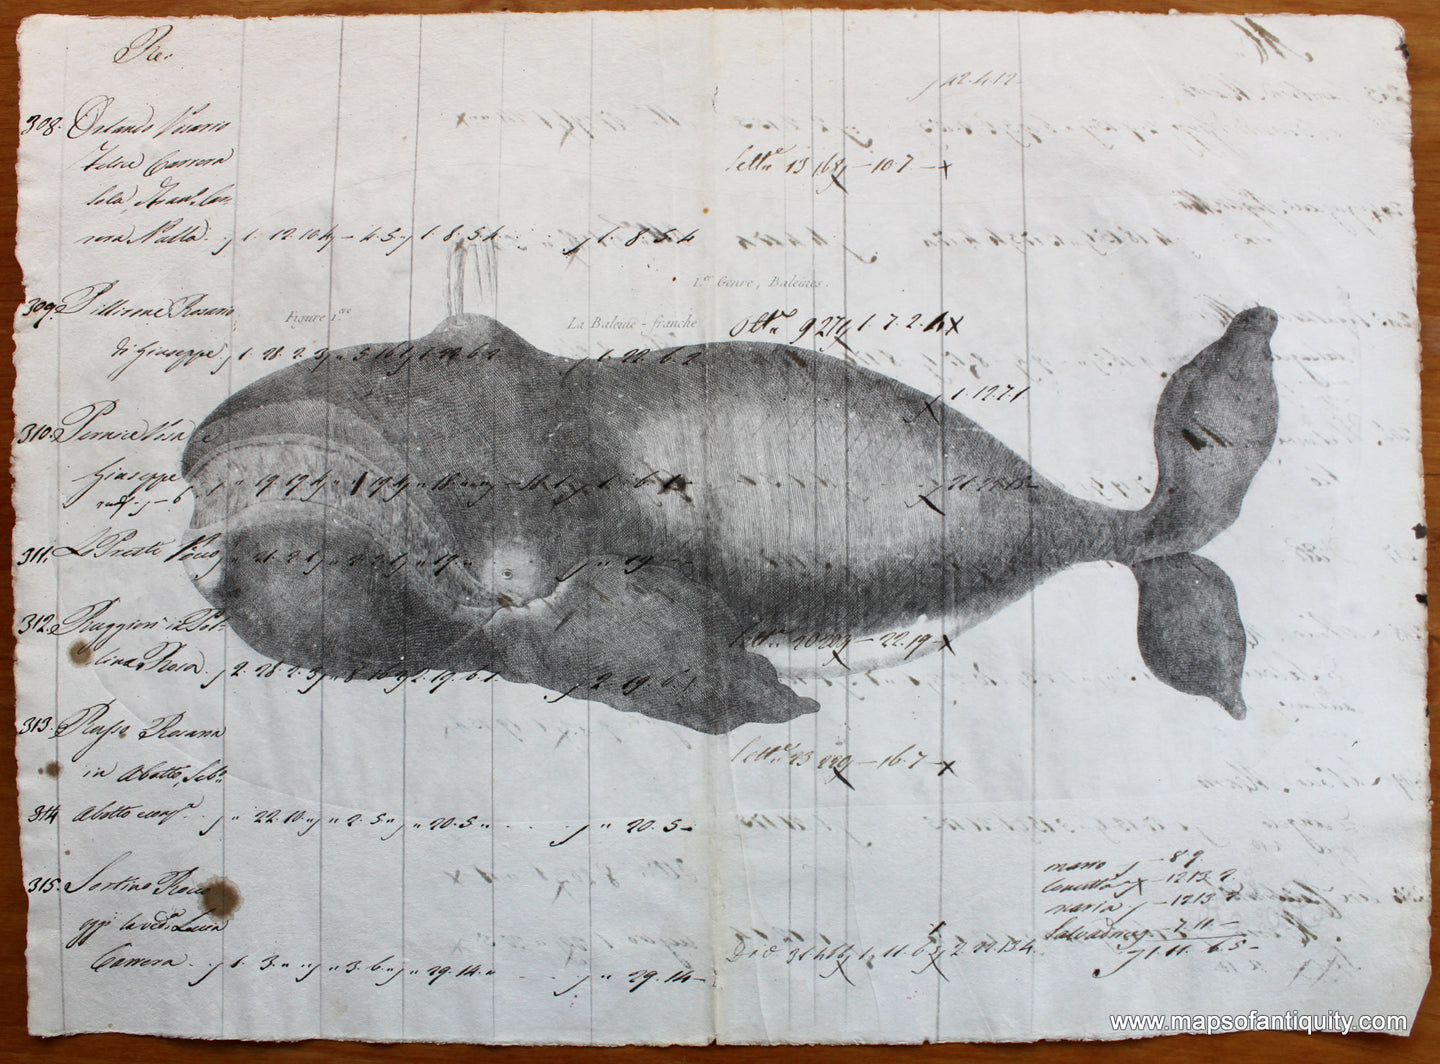 Specialty-Reproduction-Bowhead-Whale-(Reproduction-on-Antique-Paper)--Digitally-Engraved-Specialty-Reproduction---Reproduction-Maps-Of-Antiquity